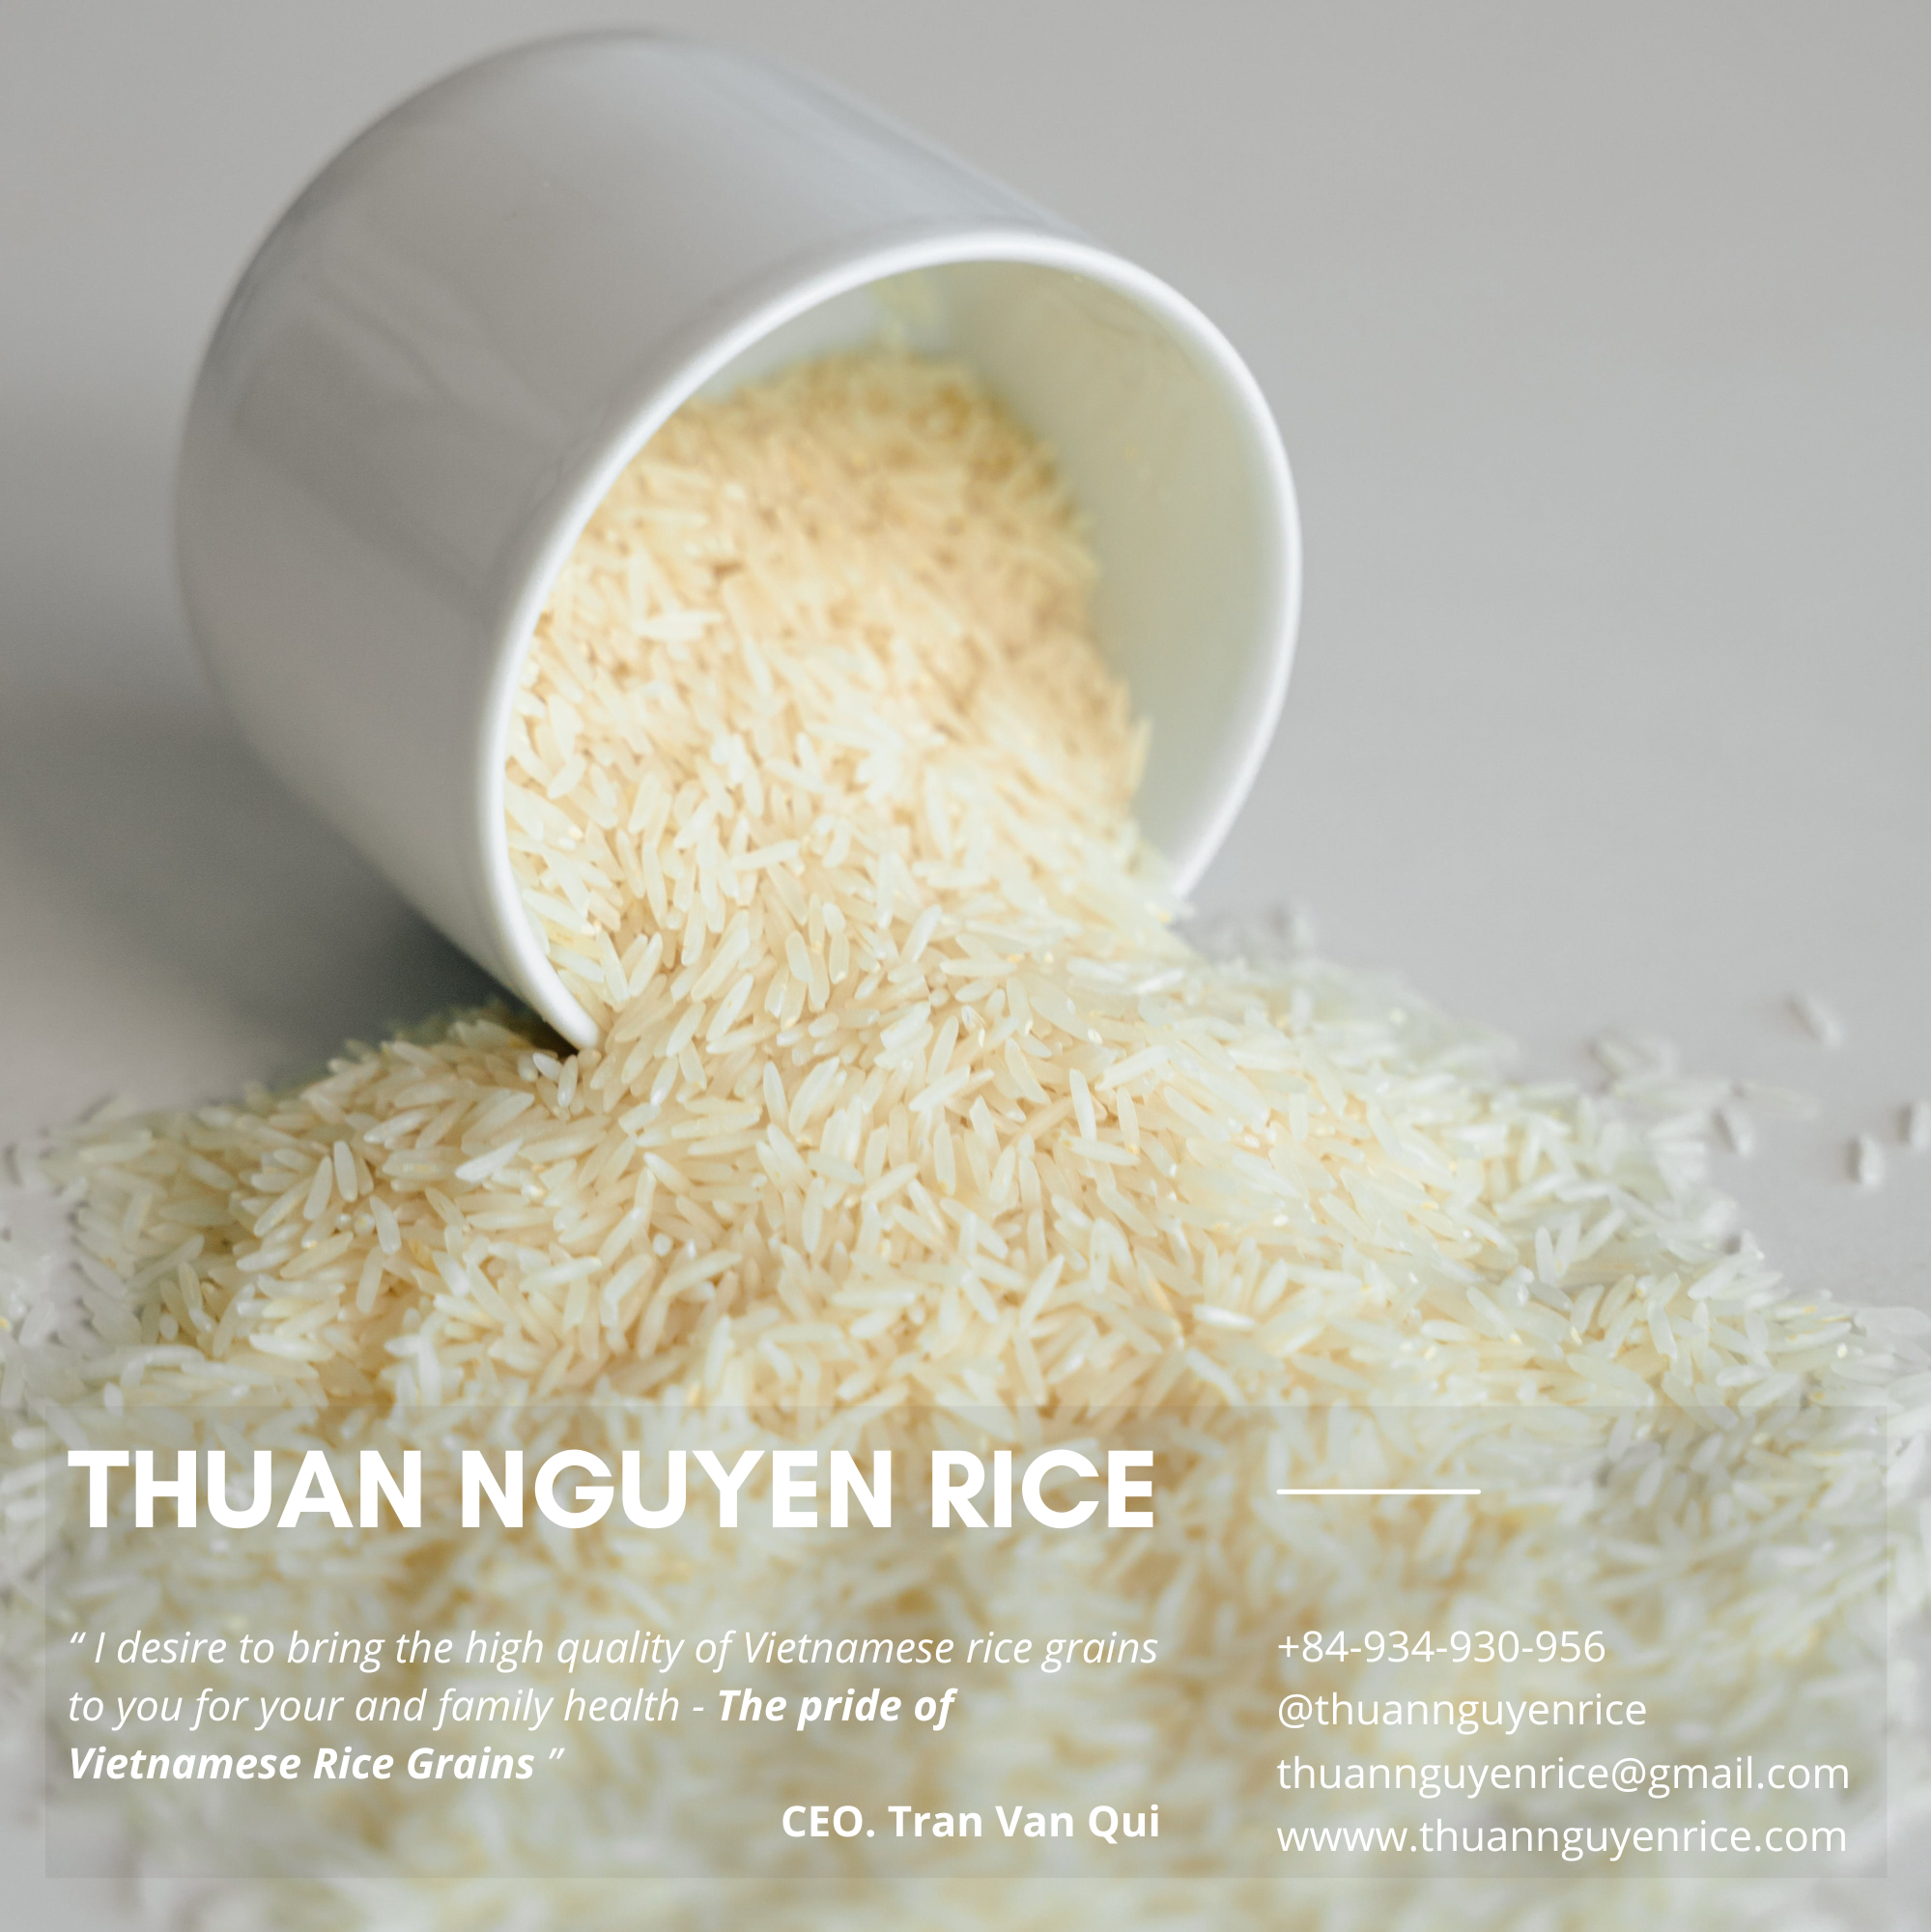 thuannguyenrice.com
Challenges and Innovations in Rice Farming